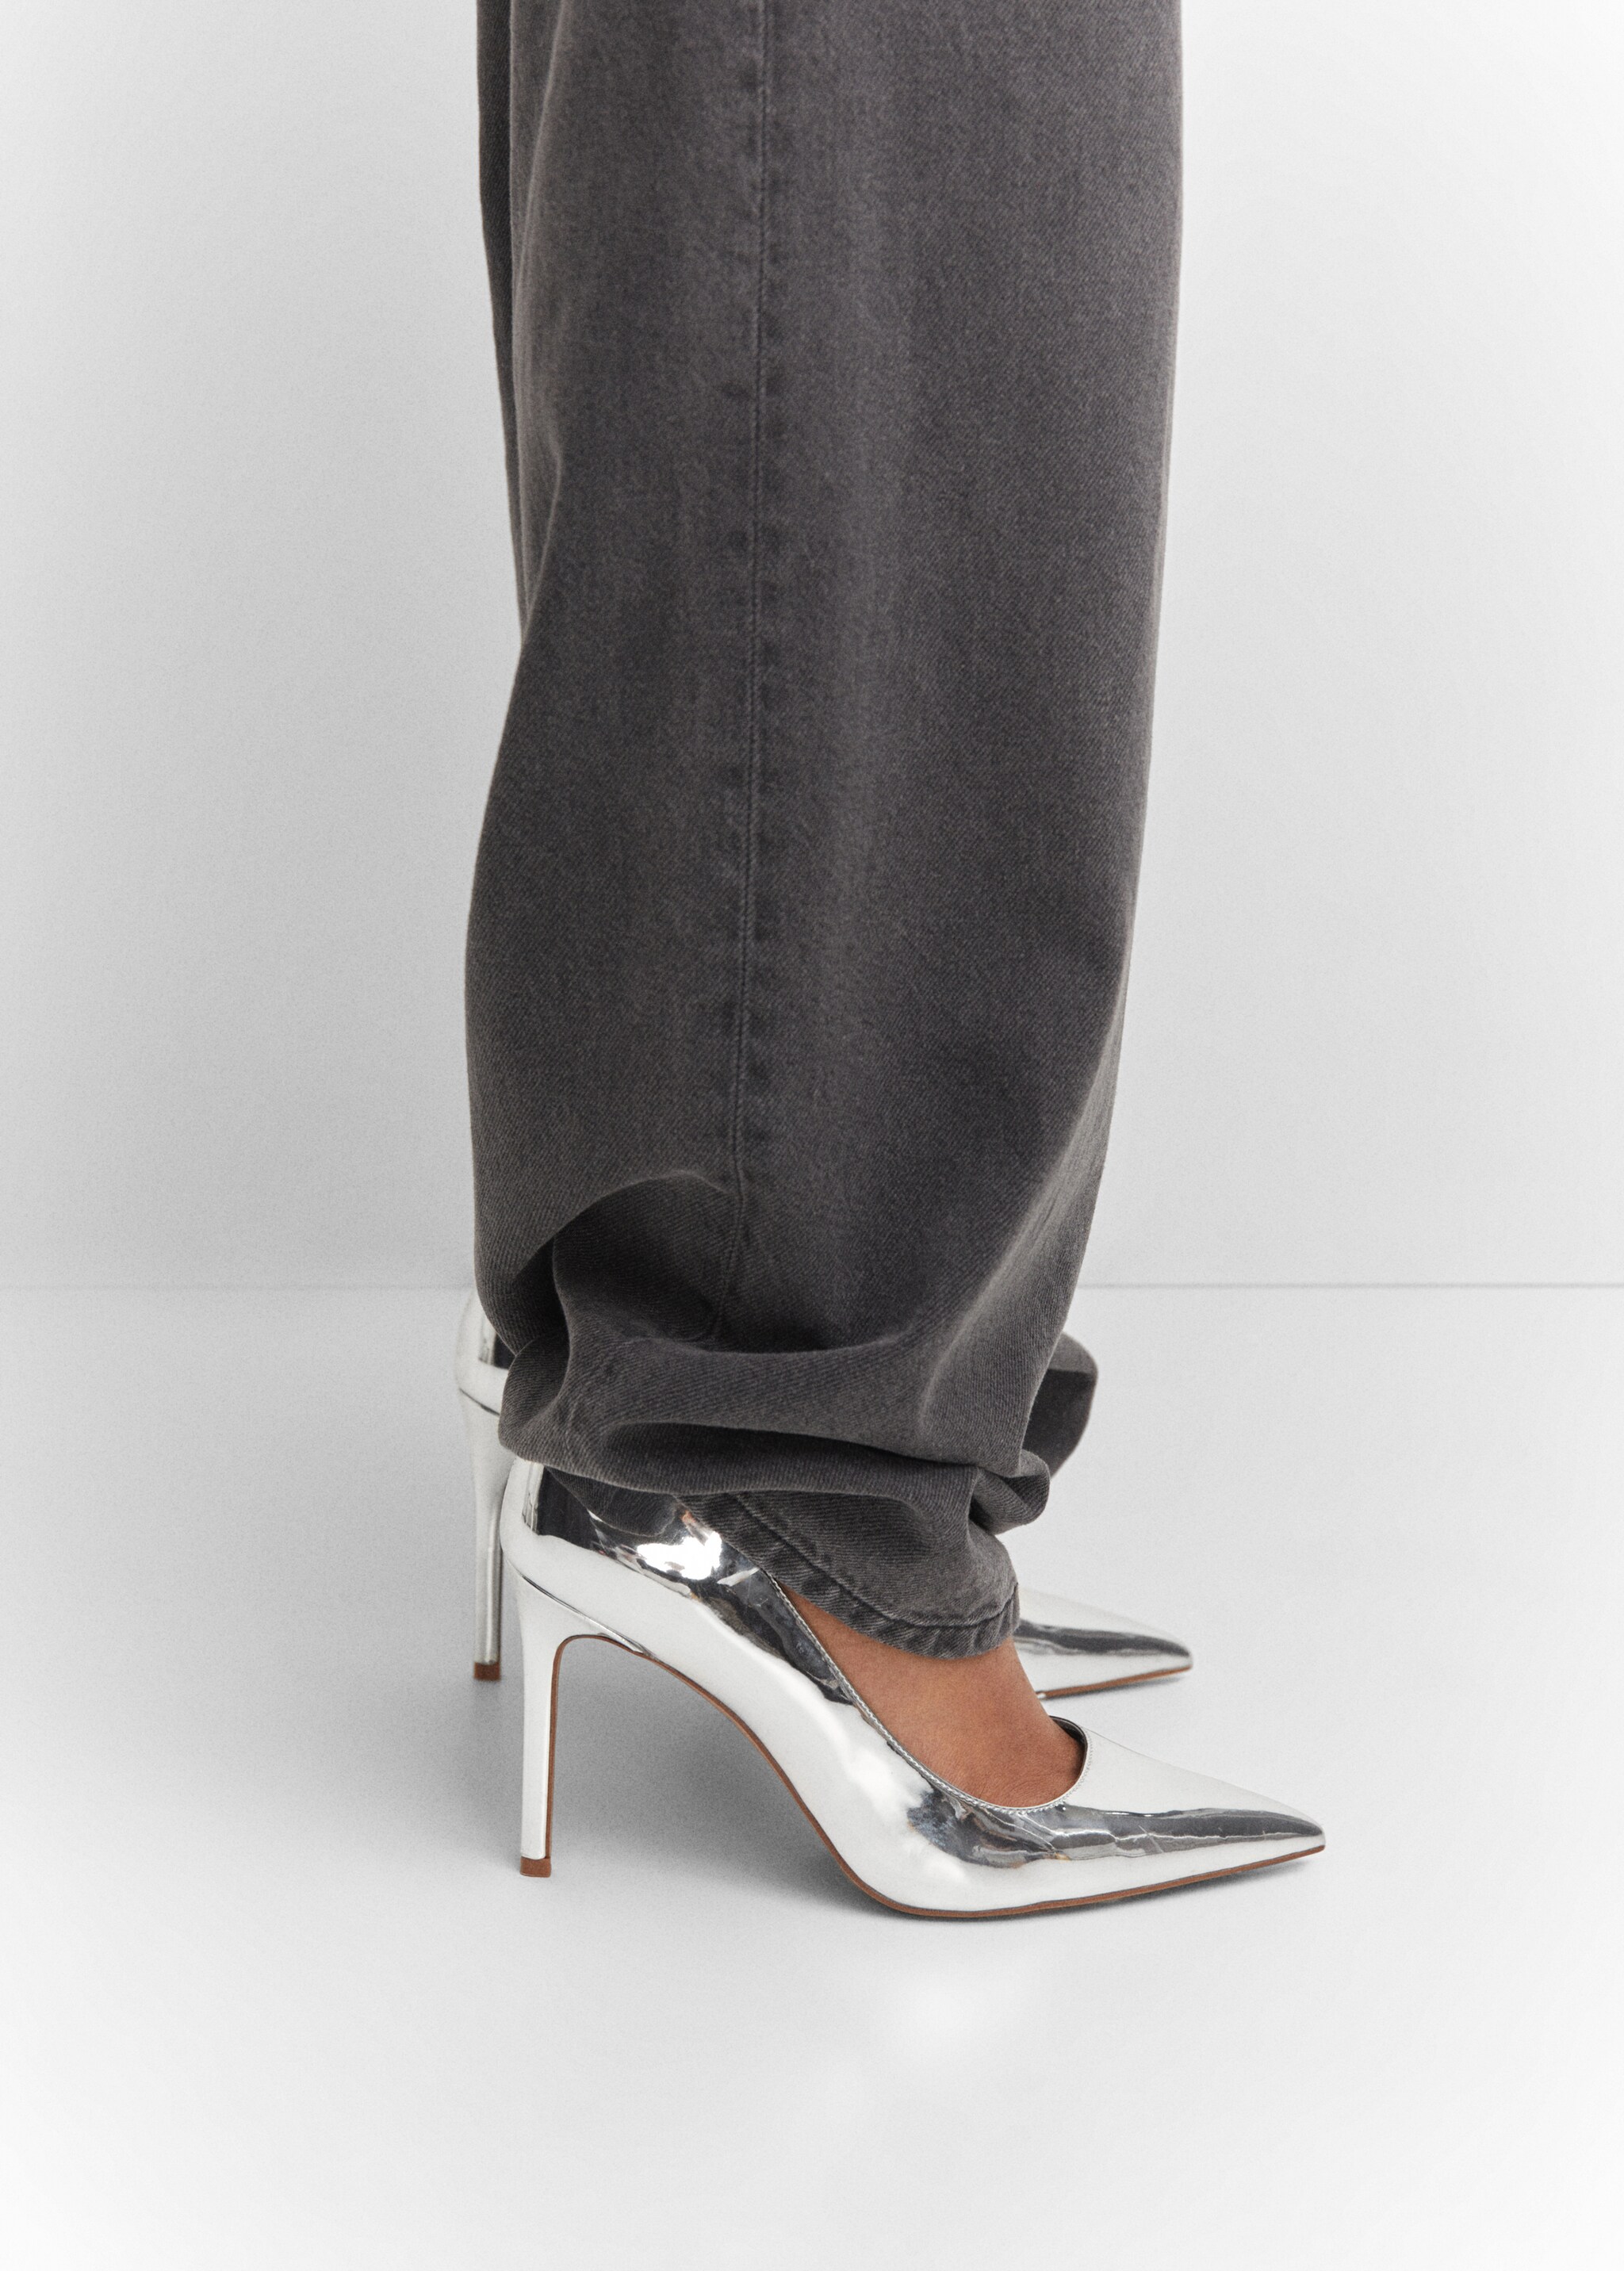 Asymmetrical heeled shoes - Details of the article 9